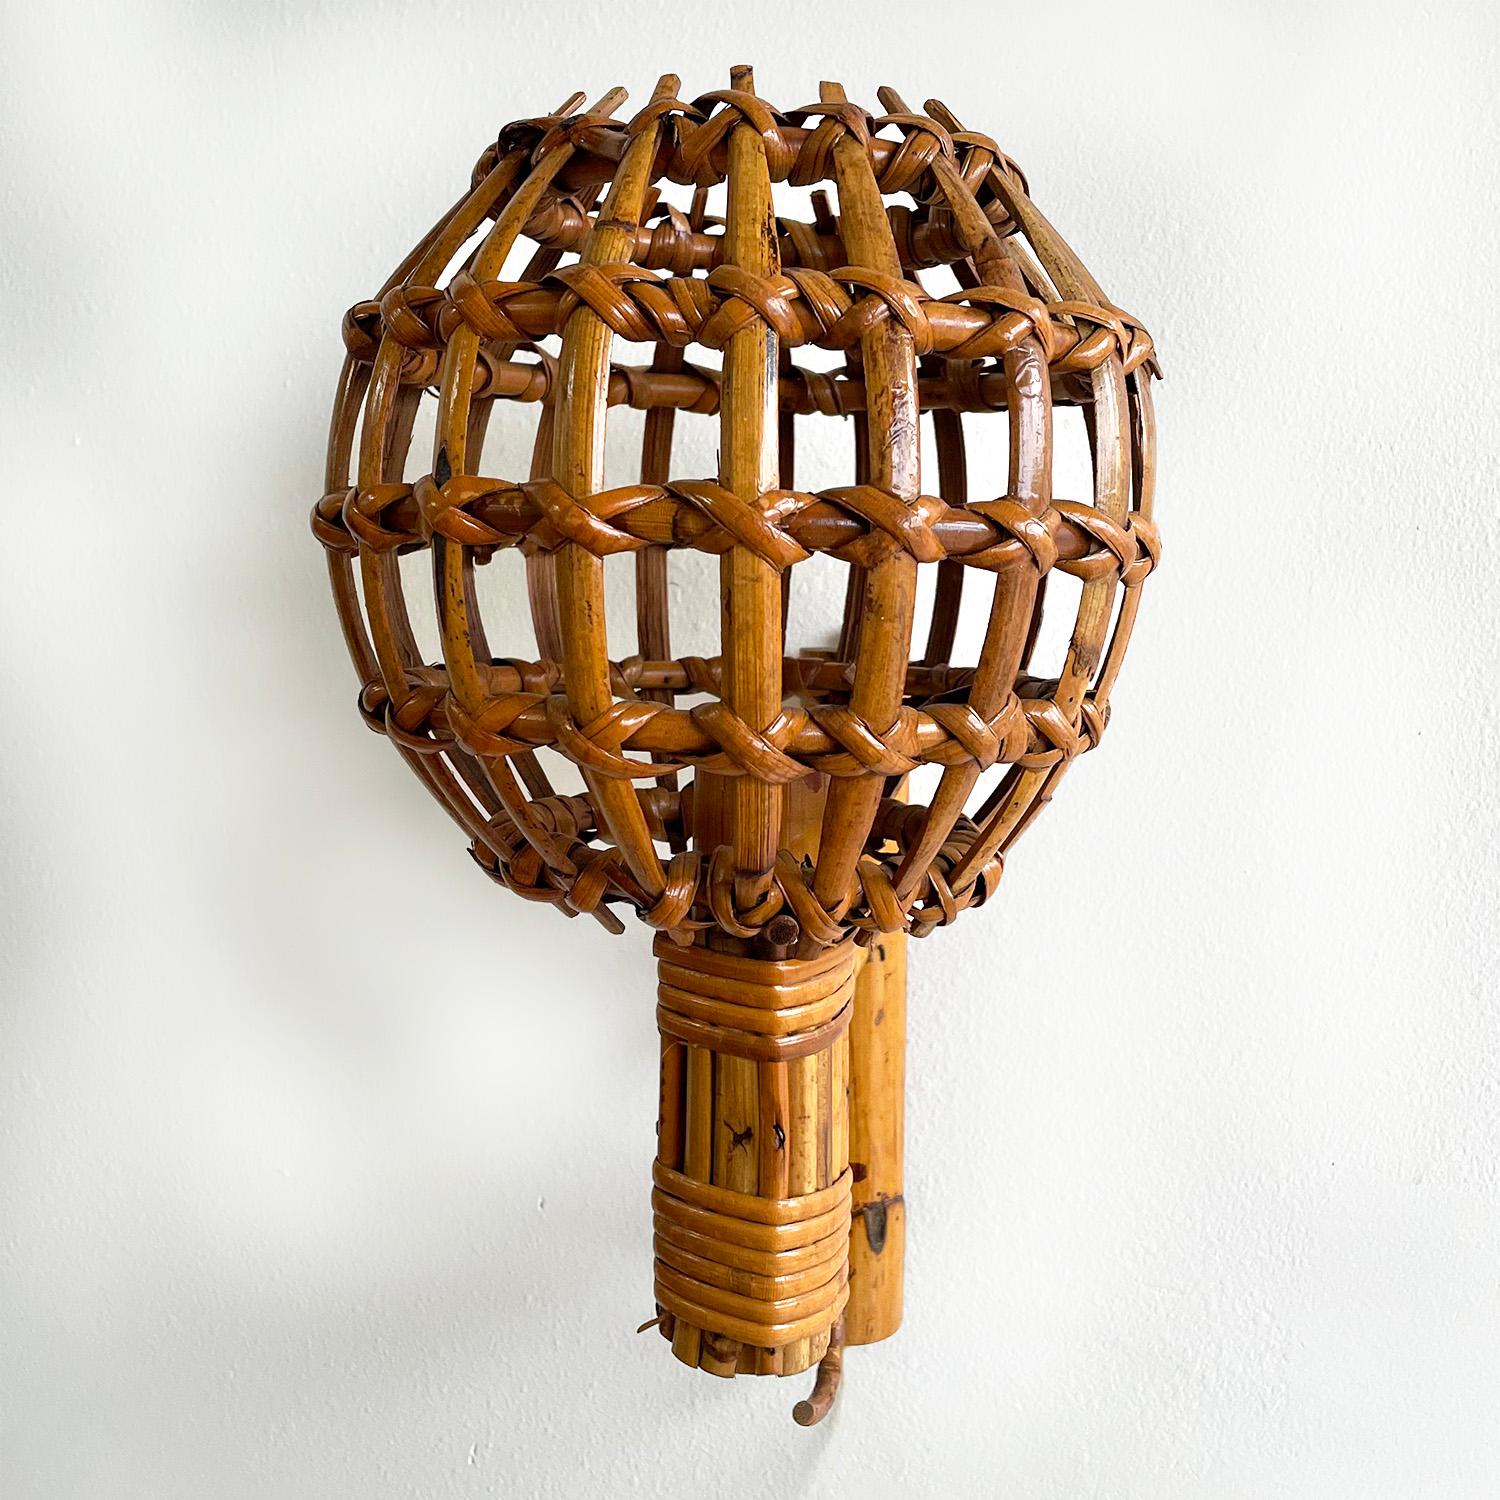 Pair of Louis Sognot french bamboo wall sconces.
Sculptural rings create a unique shade, which illuminates in a beautiful pattern.
Newly rewired.